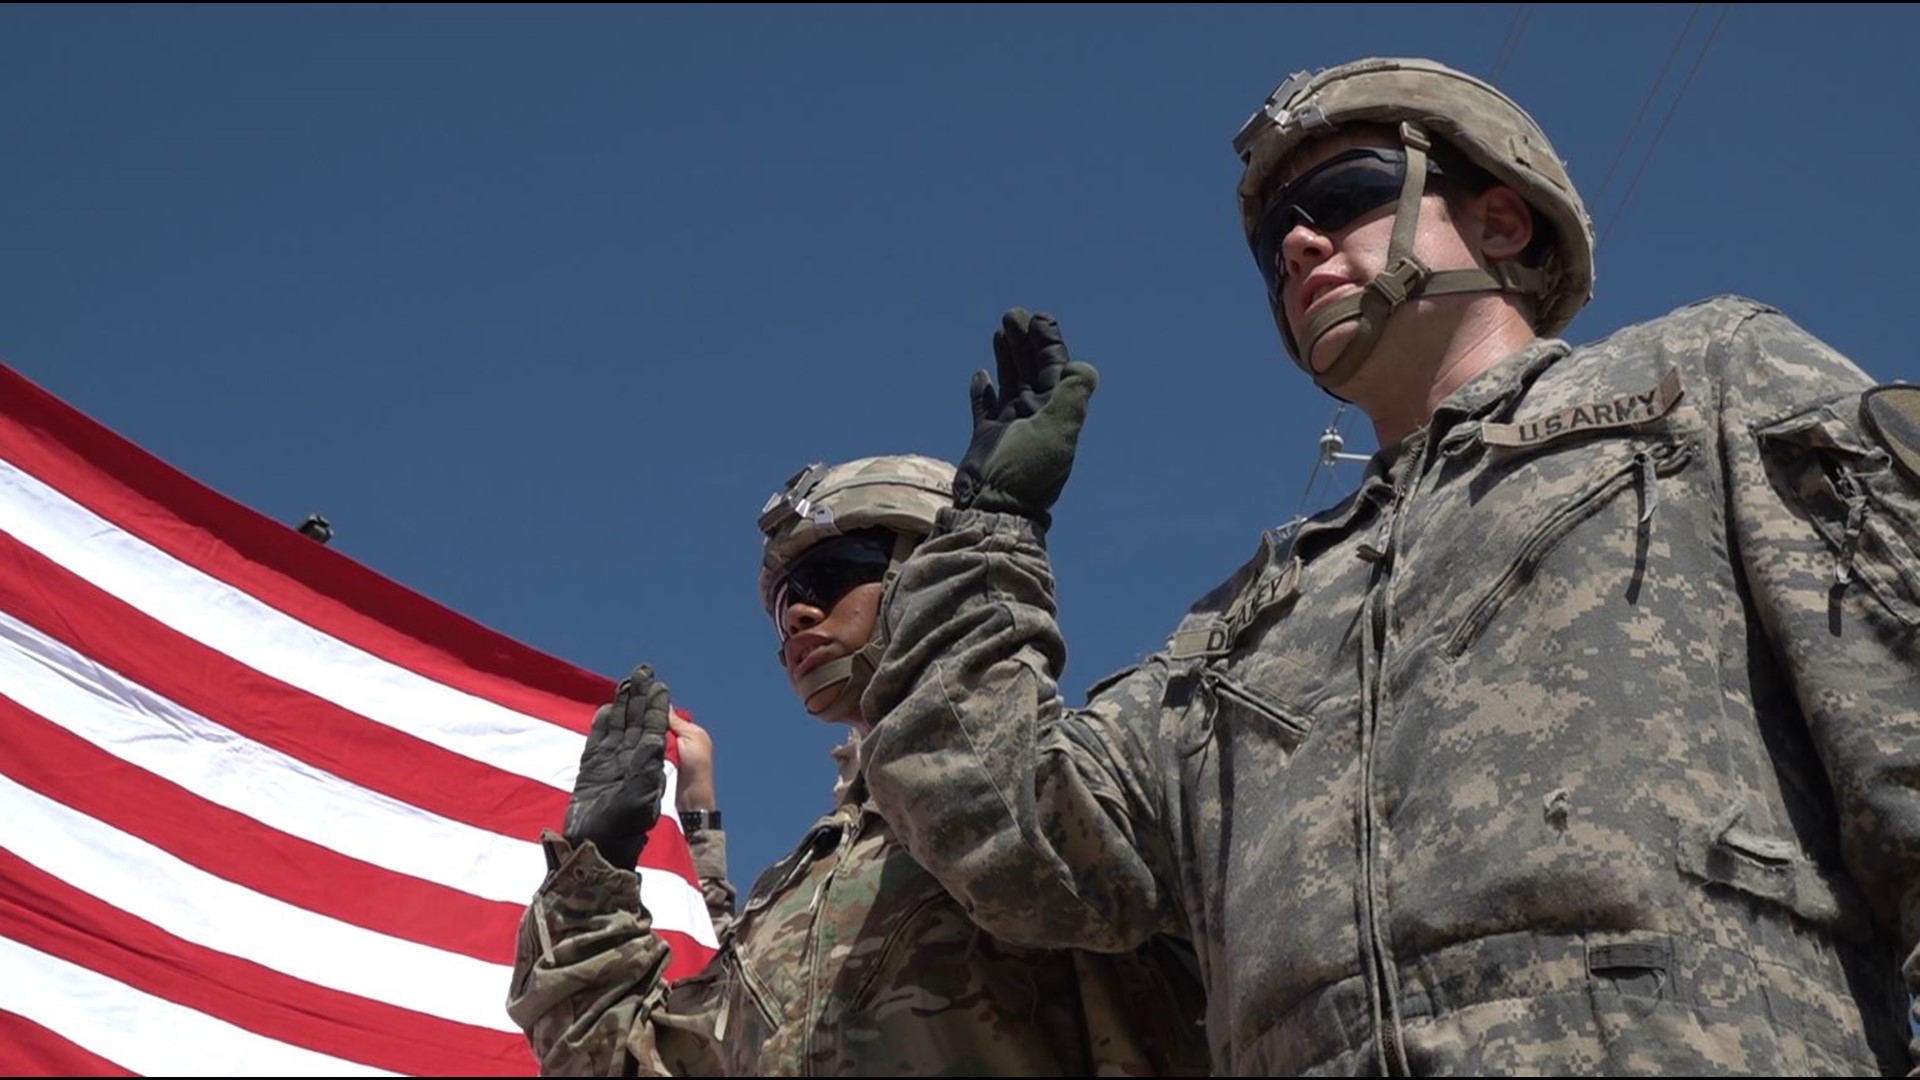 Six Fort Hood soldiers deployed to the city to help with recovery efforts.